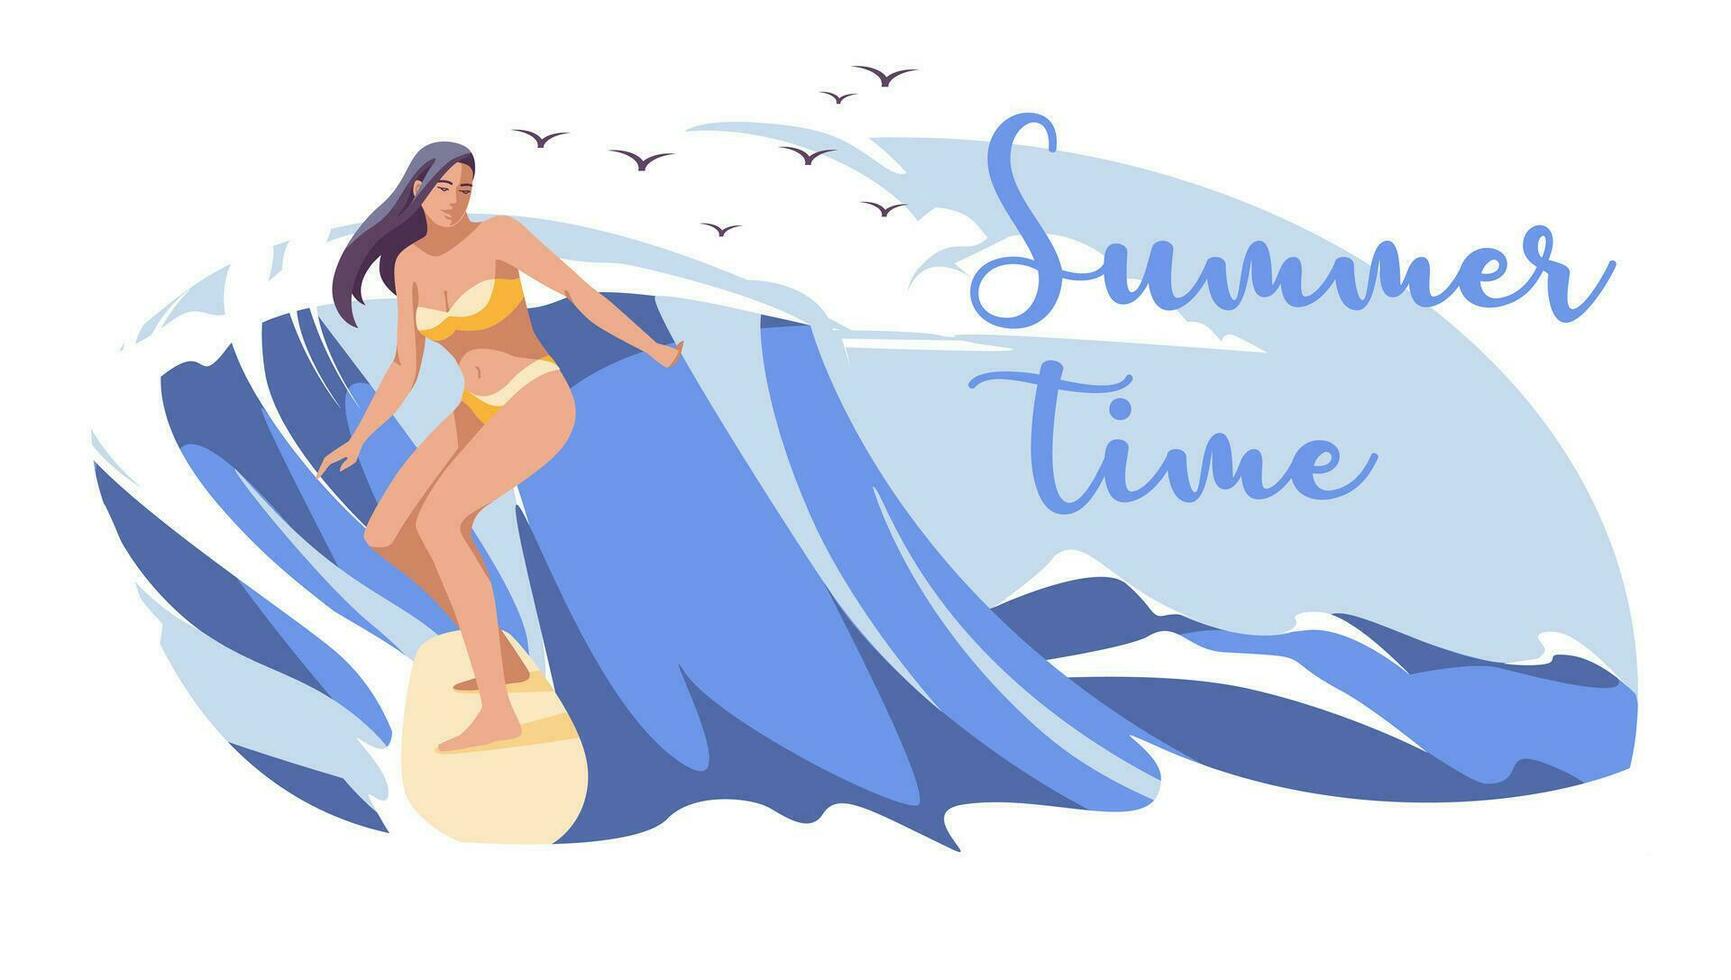 Summer surfing. Young people a guy and a girl surfing on big ocean waves. Tropical shore with palm trees. Flat vector illustration